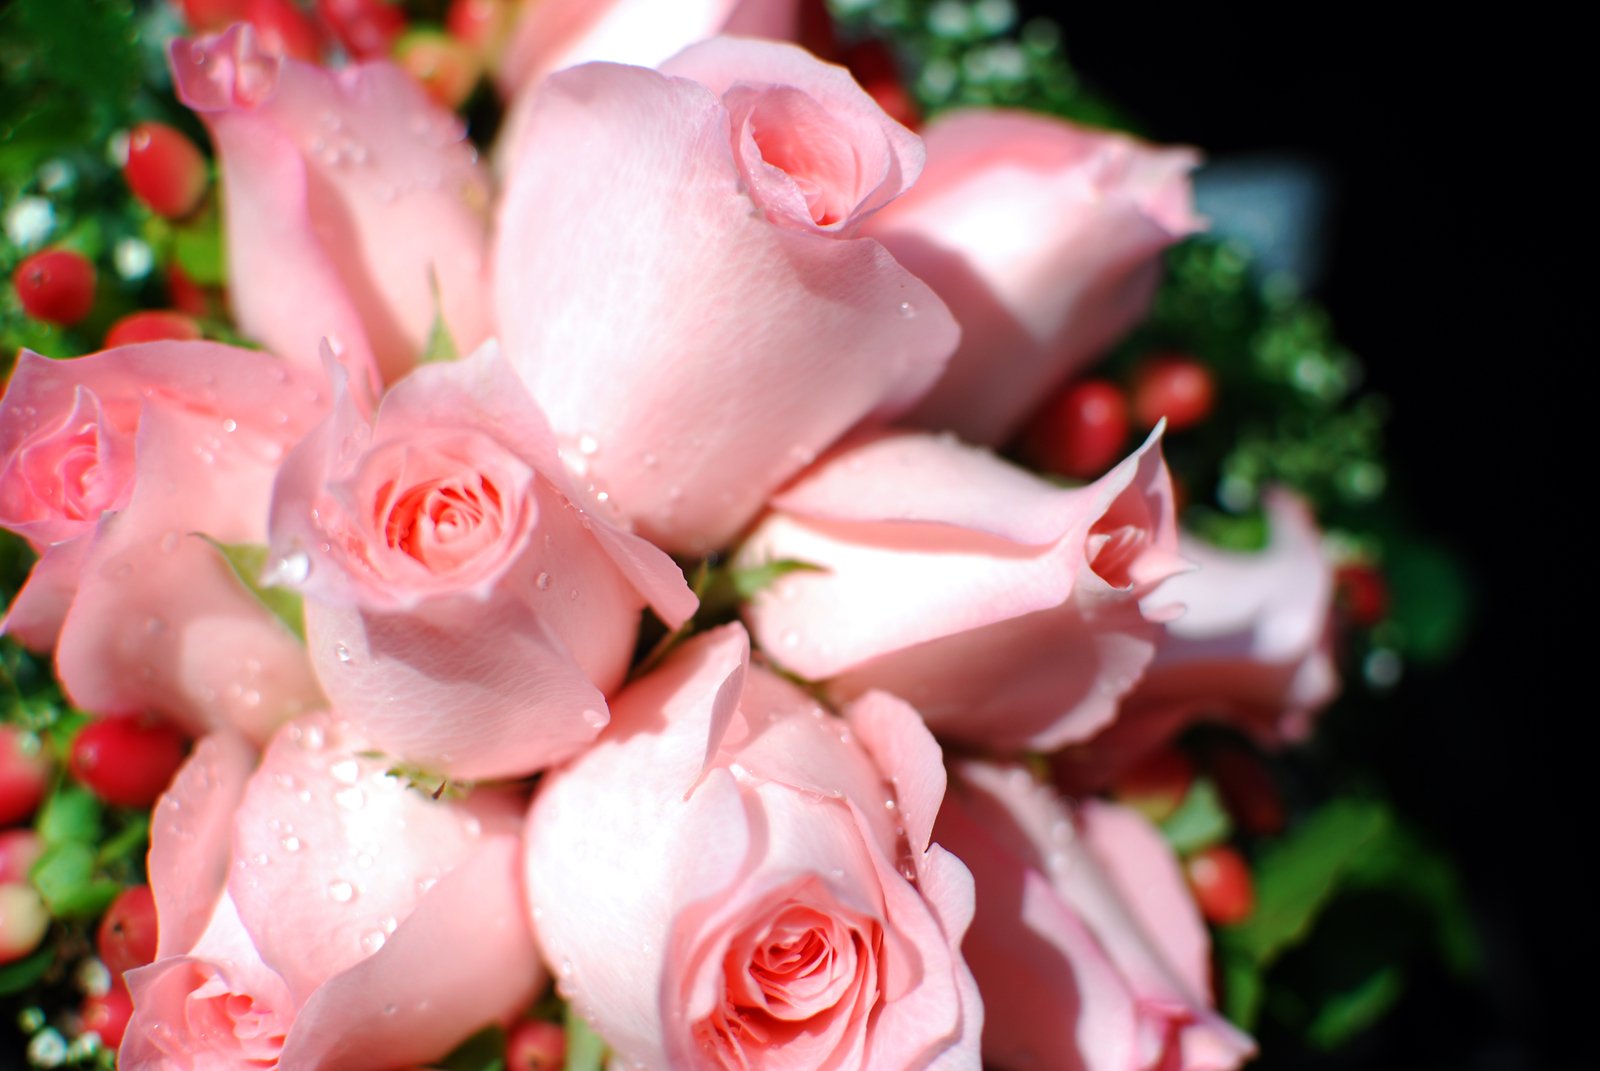 this is a close up image of many pink roses